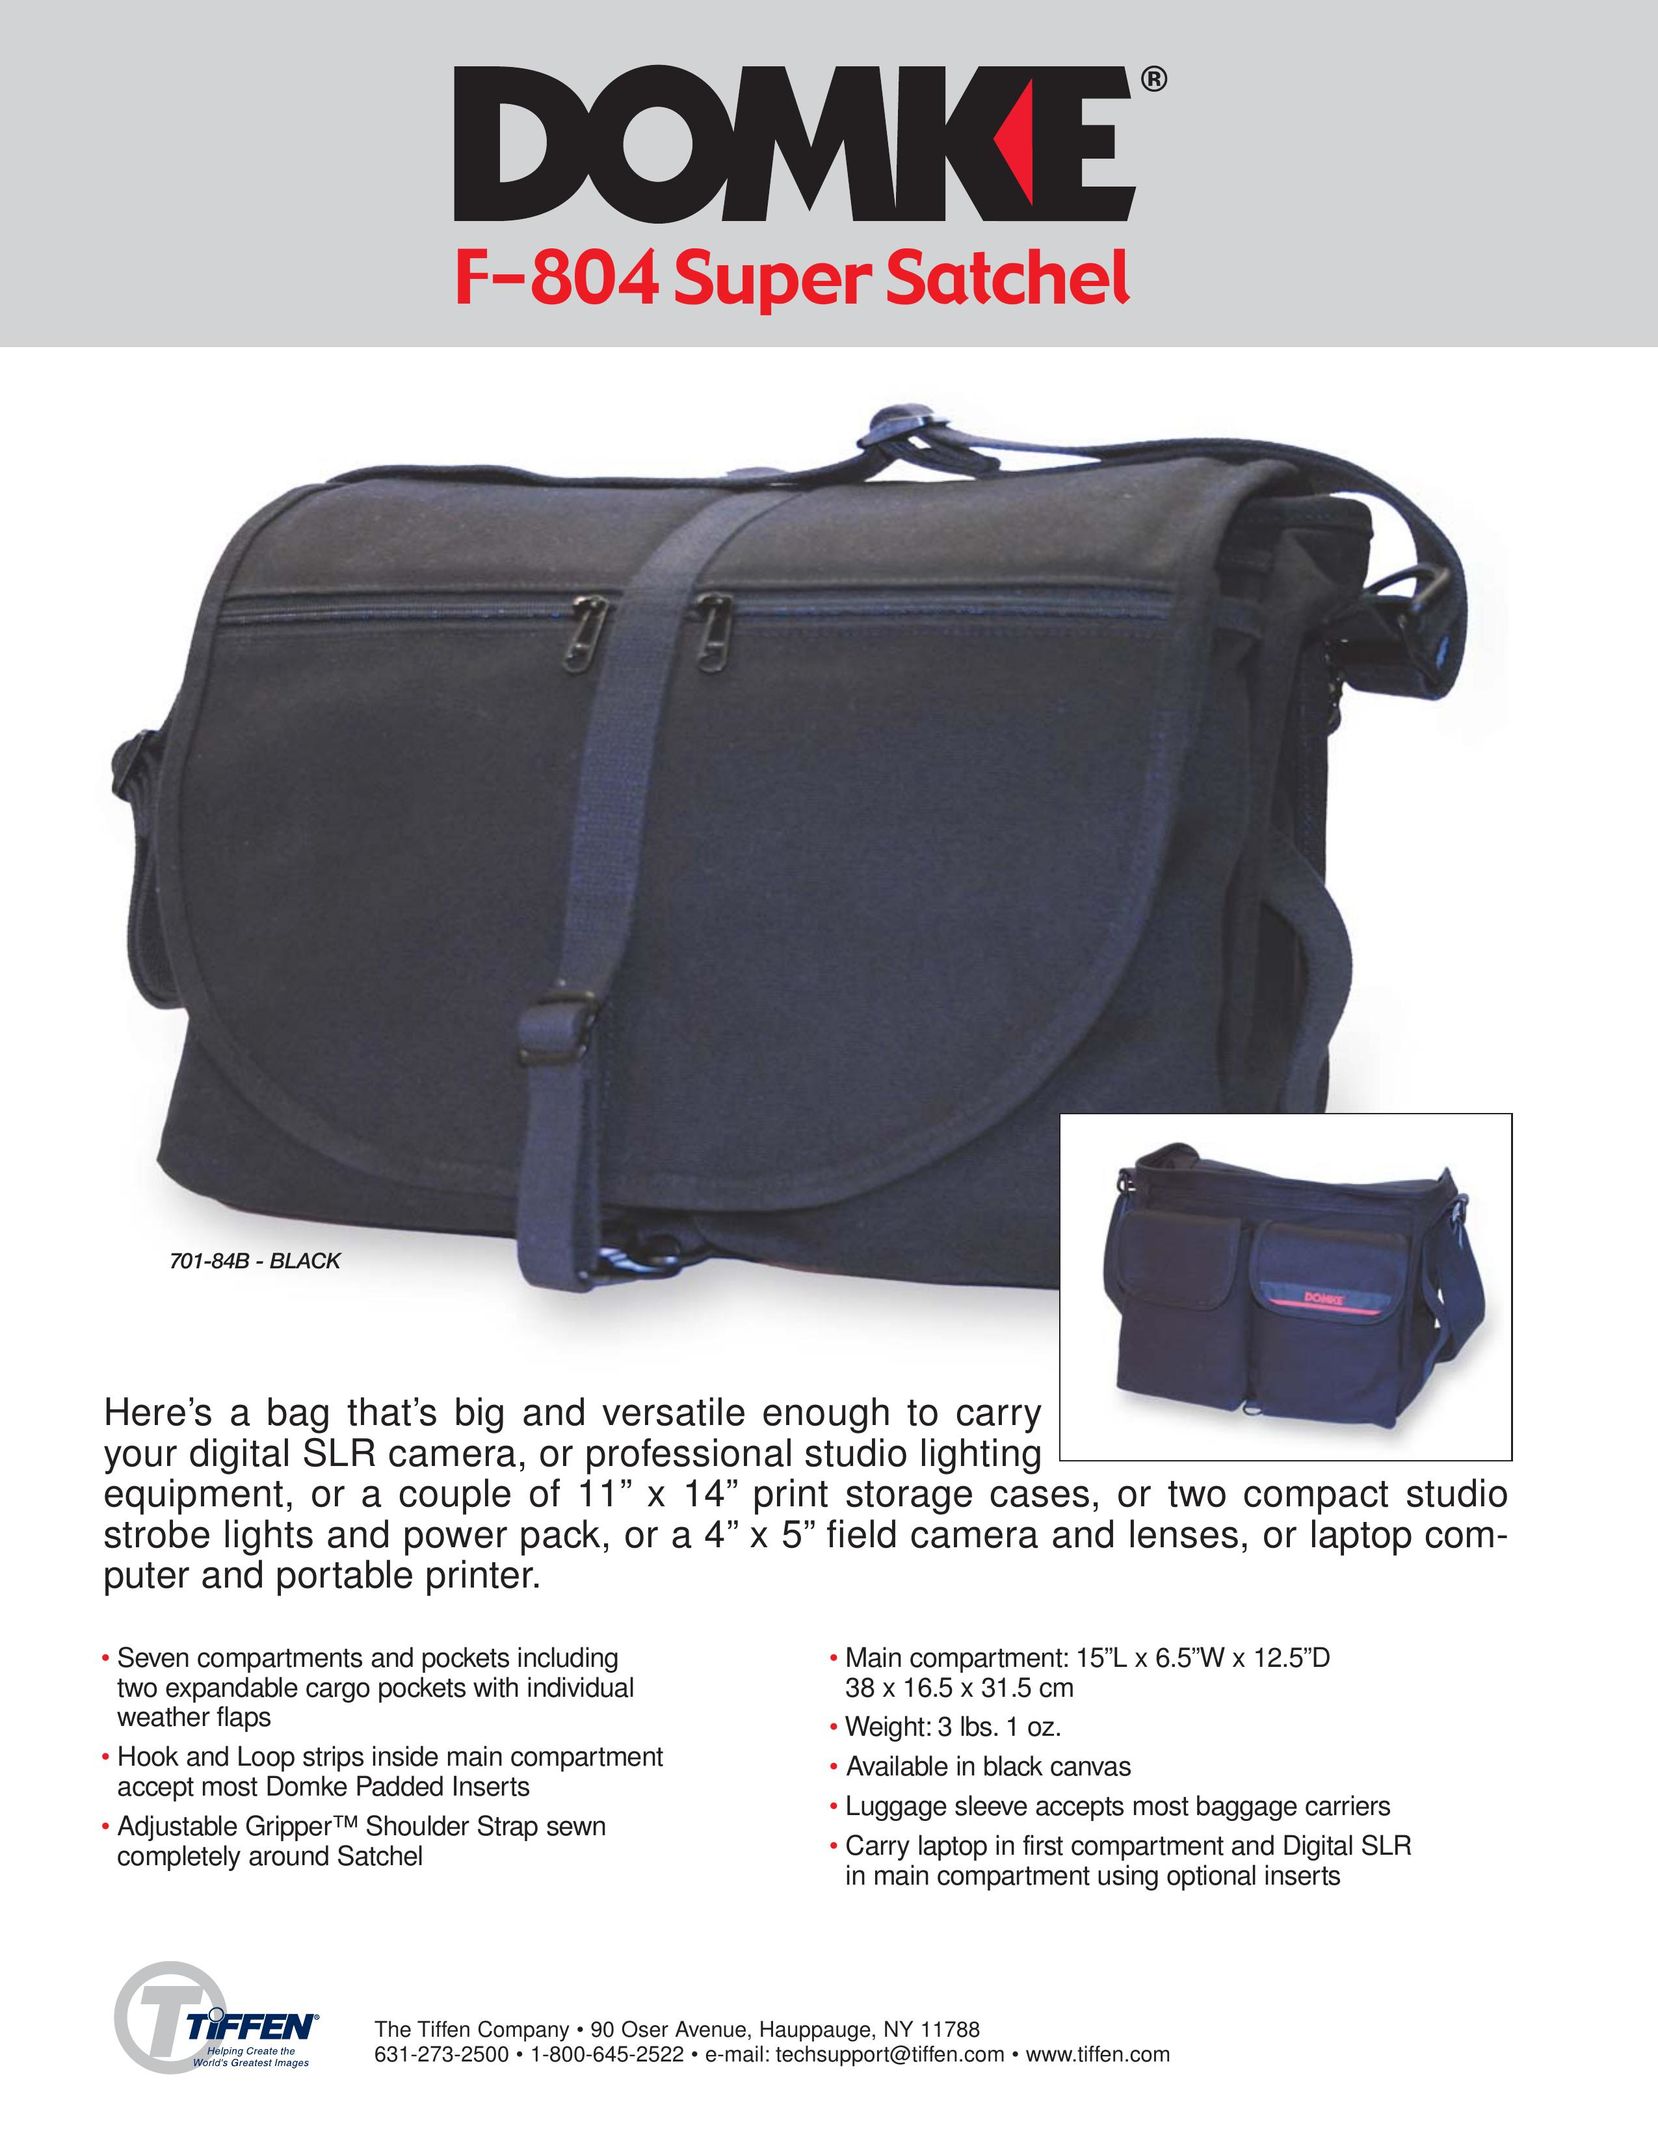 Tiffen F-804 Carrying Case User Manual